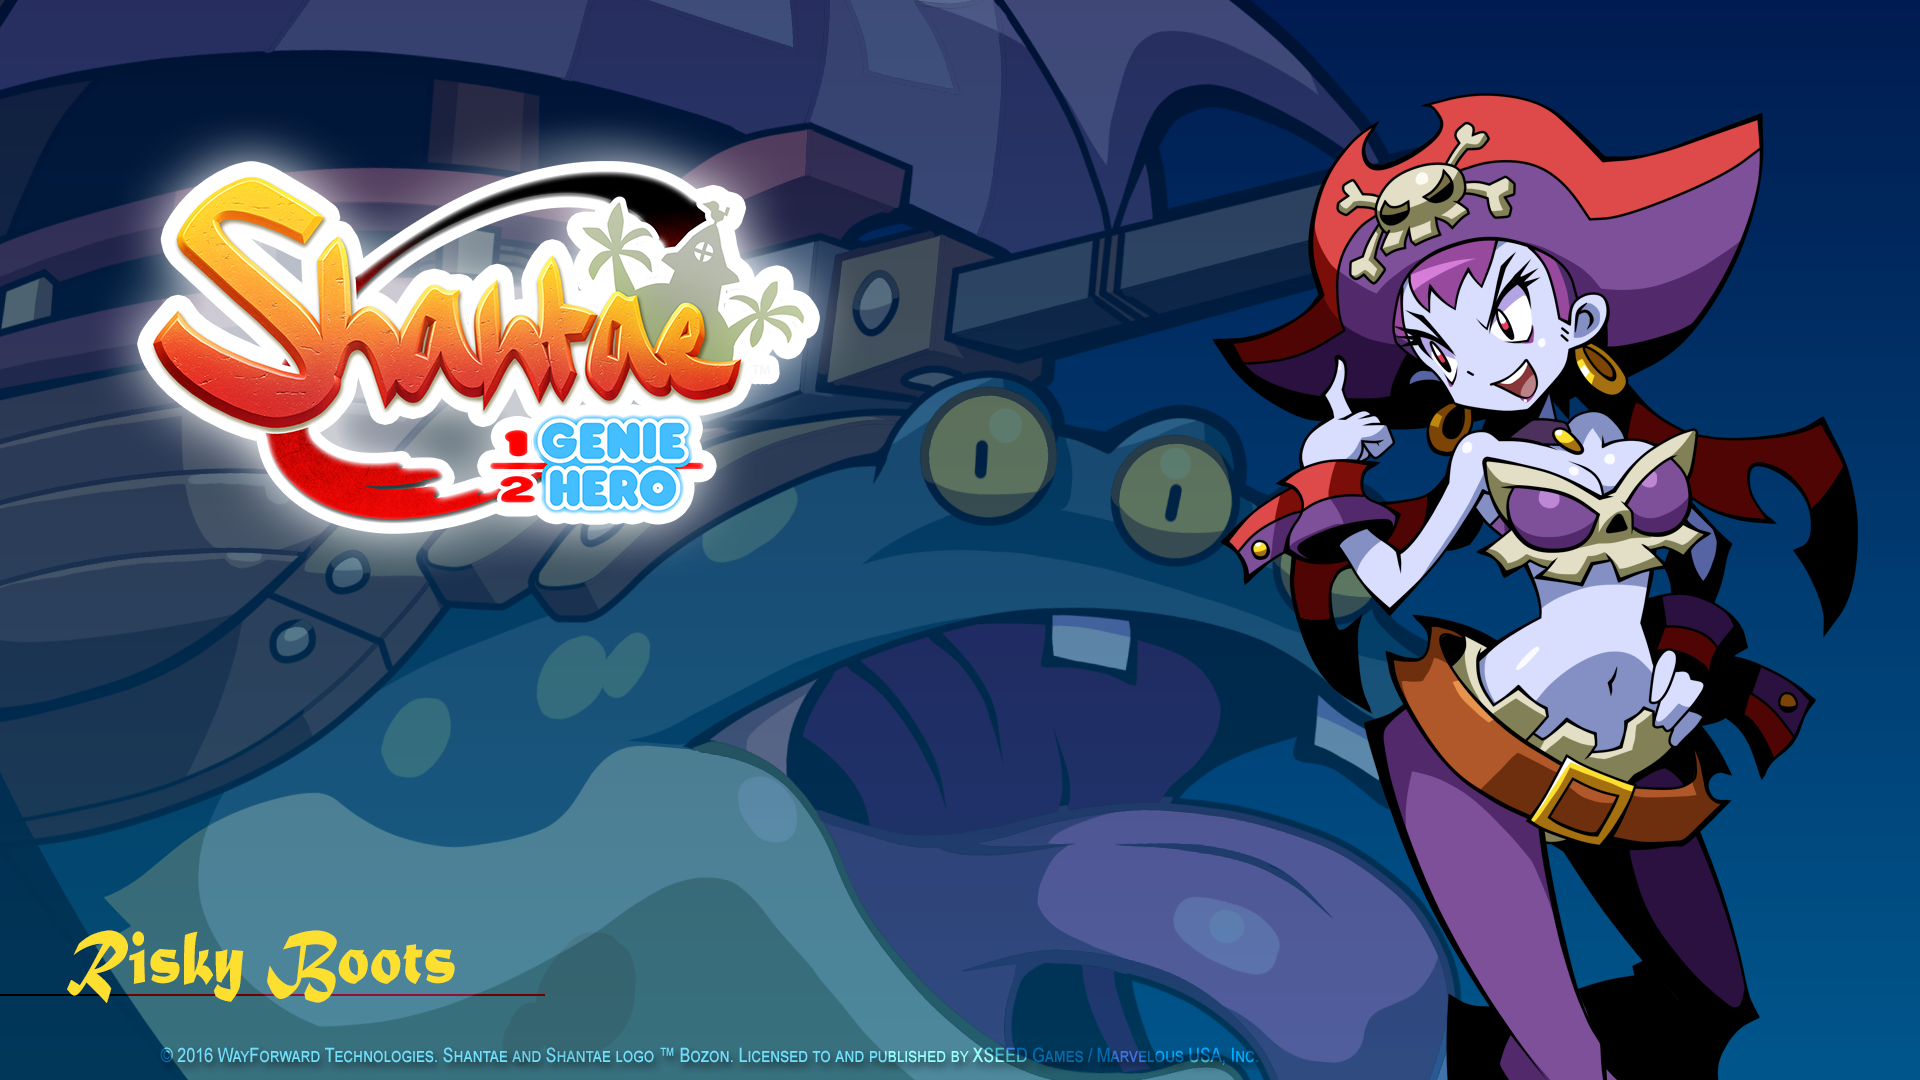 ROA on X Shantae HalfGenie Hero Wallpaper 1920x1080 right click  Save image as or Mobile tap to Download This Wallpaper from Official  WF httpstcololo4eD0Hc  X